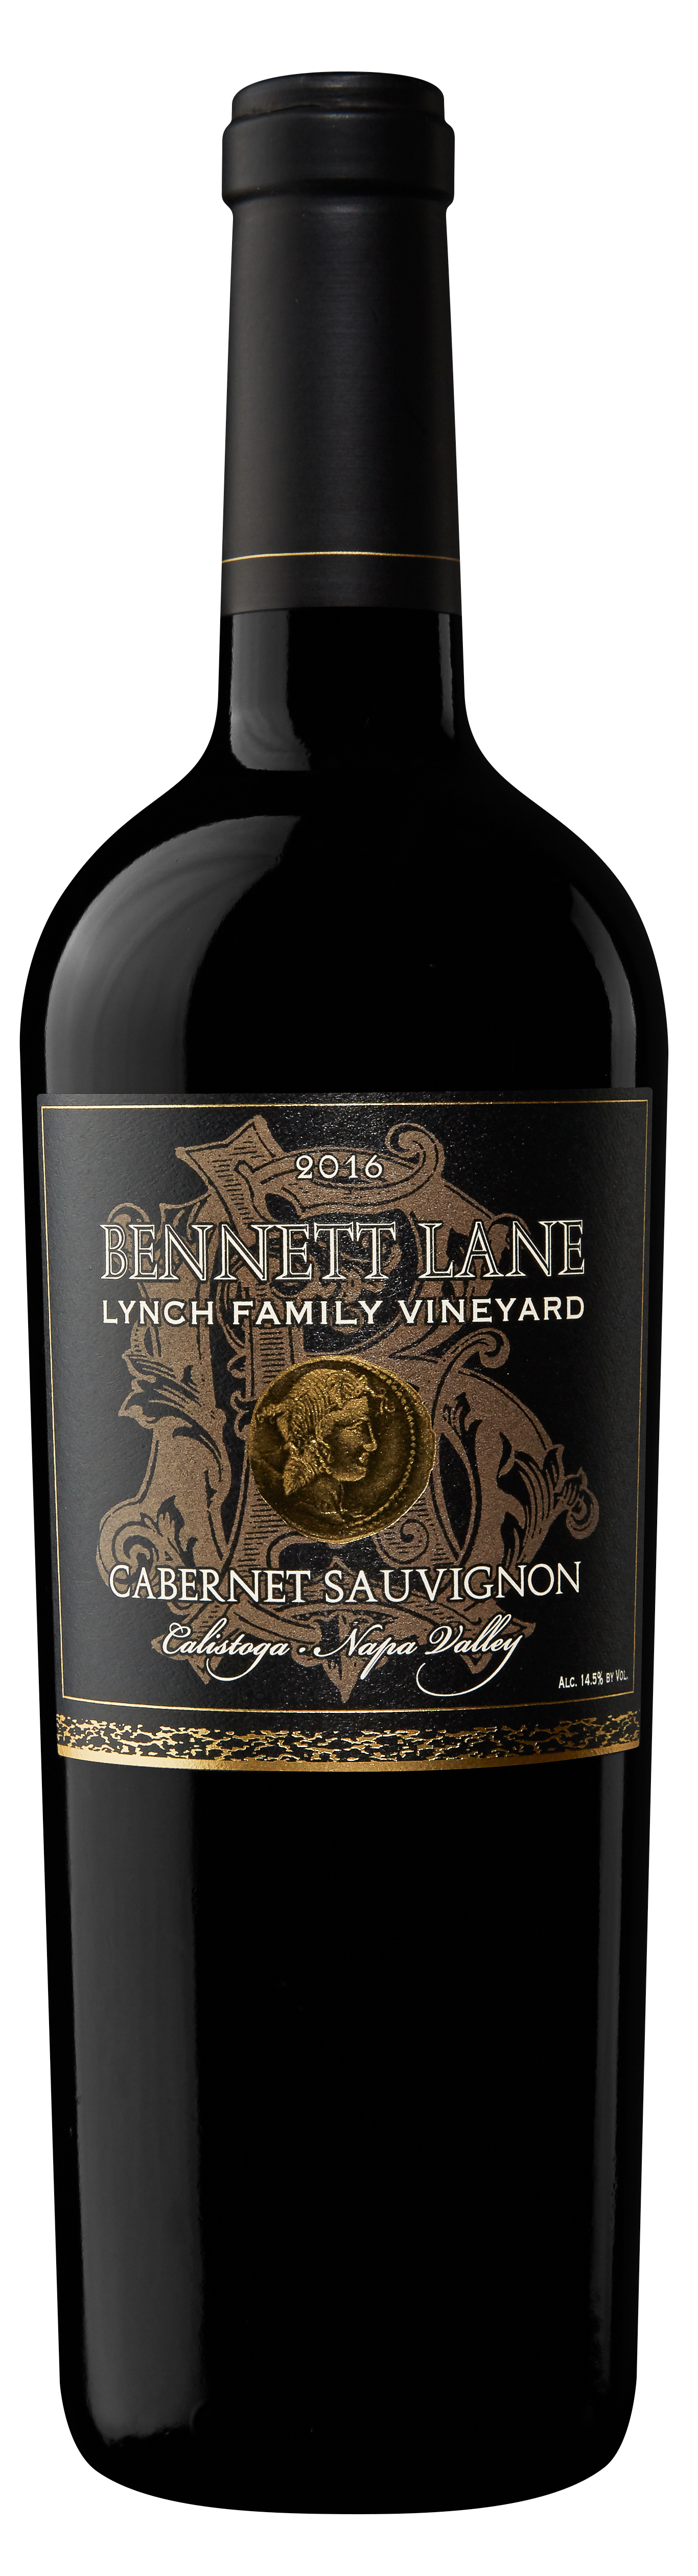 Product Image for 2021 Lynch Family Vineyard Cabernet Sauvignon